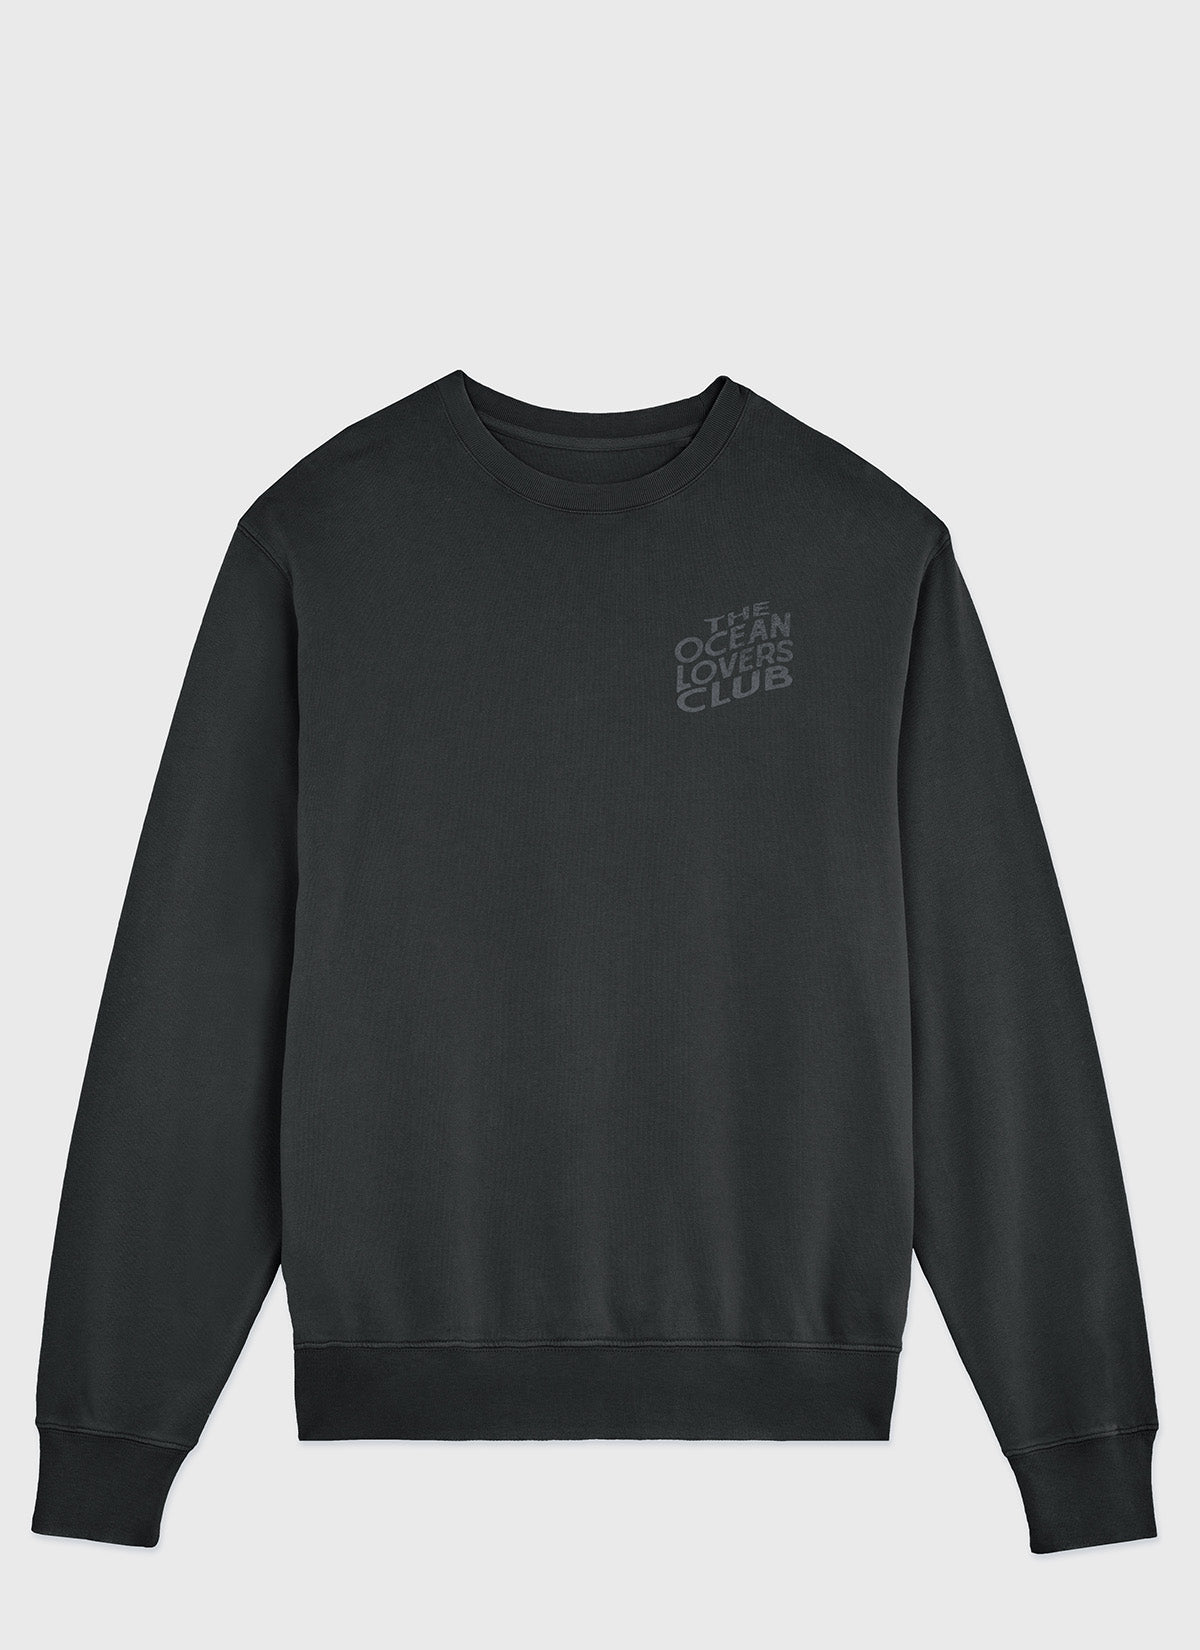 Sweat "The Oceans Lovers Club"